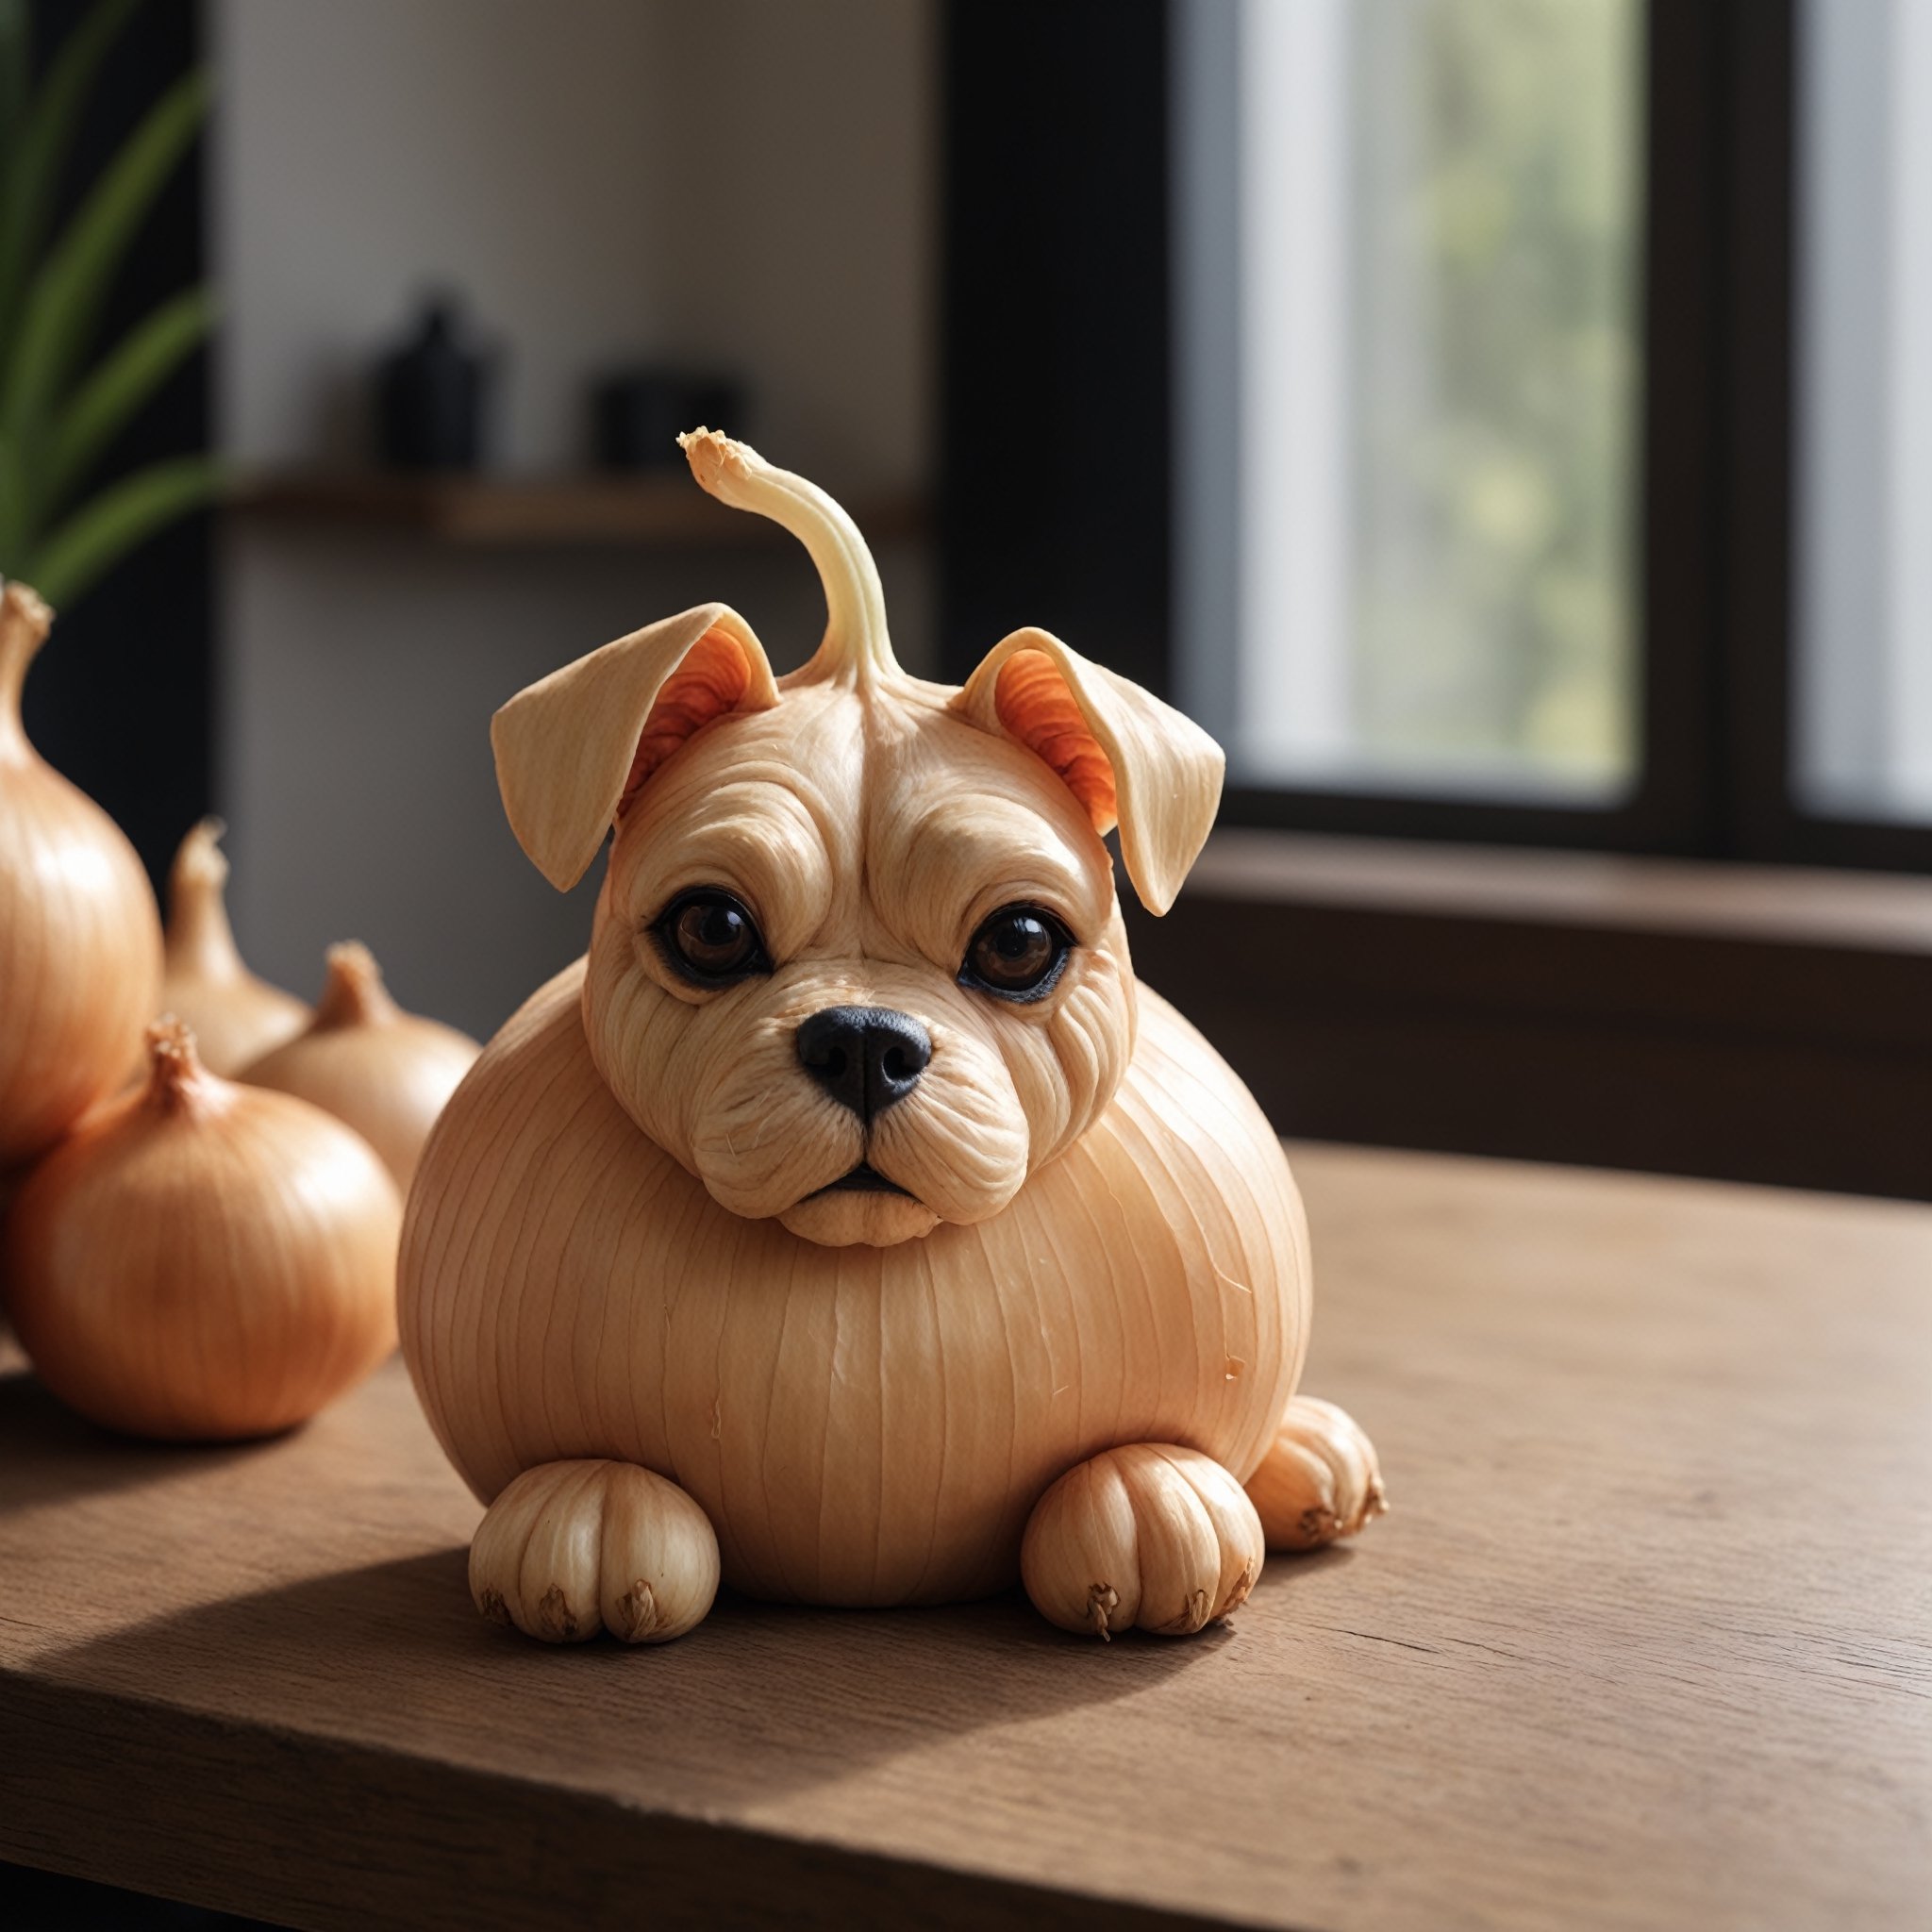 Detailed  closeup photo of a onion shaped like a dog, sitting on a table,natural light